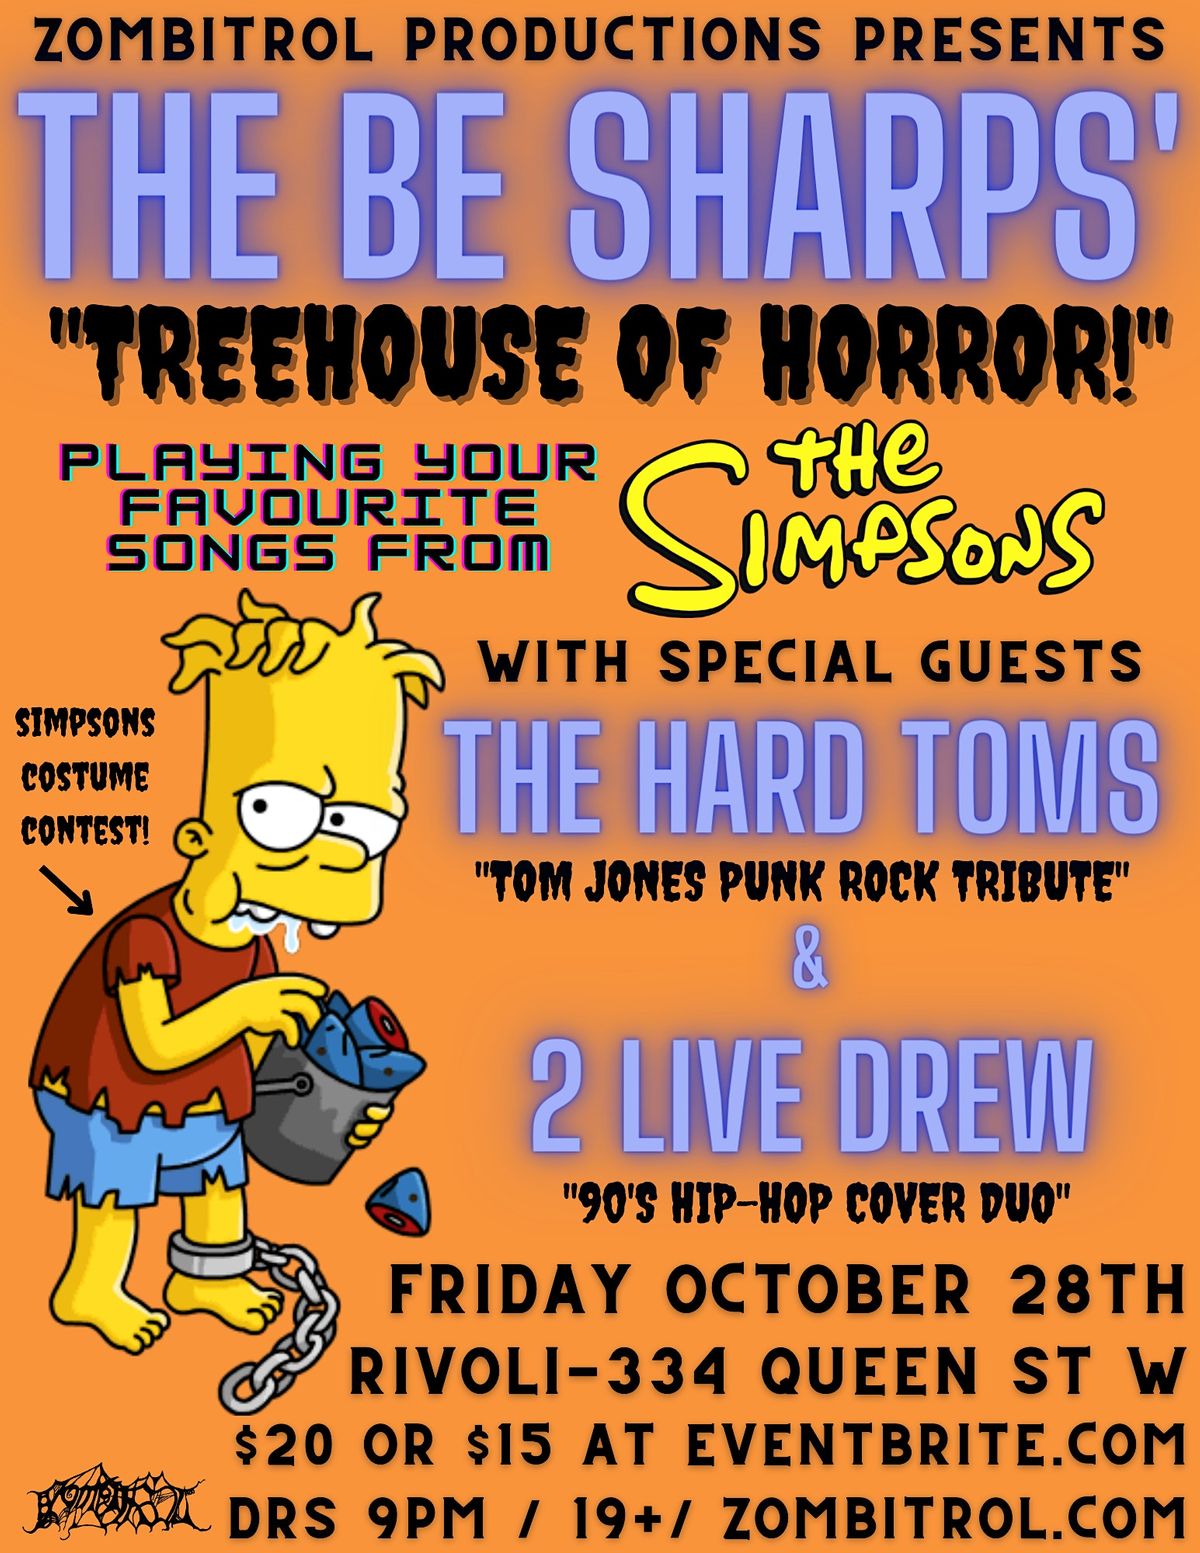 The Be Sharps' Treehouse of Horror